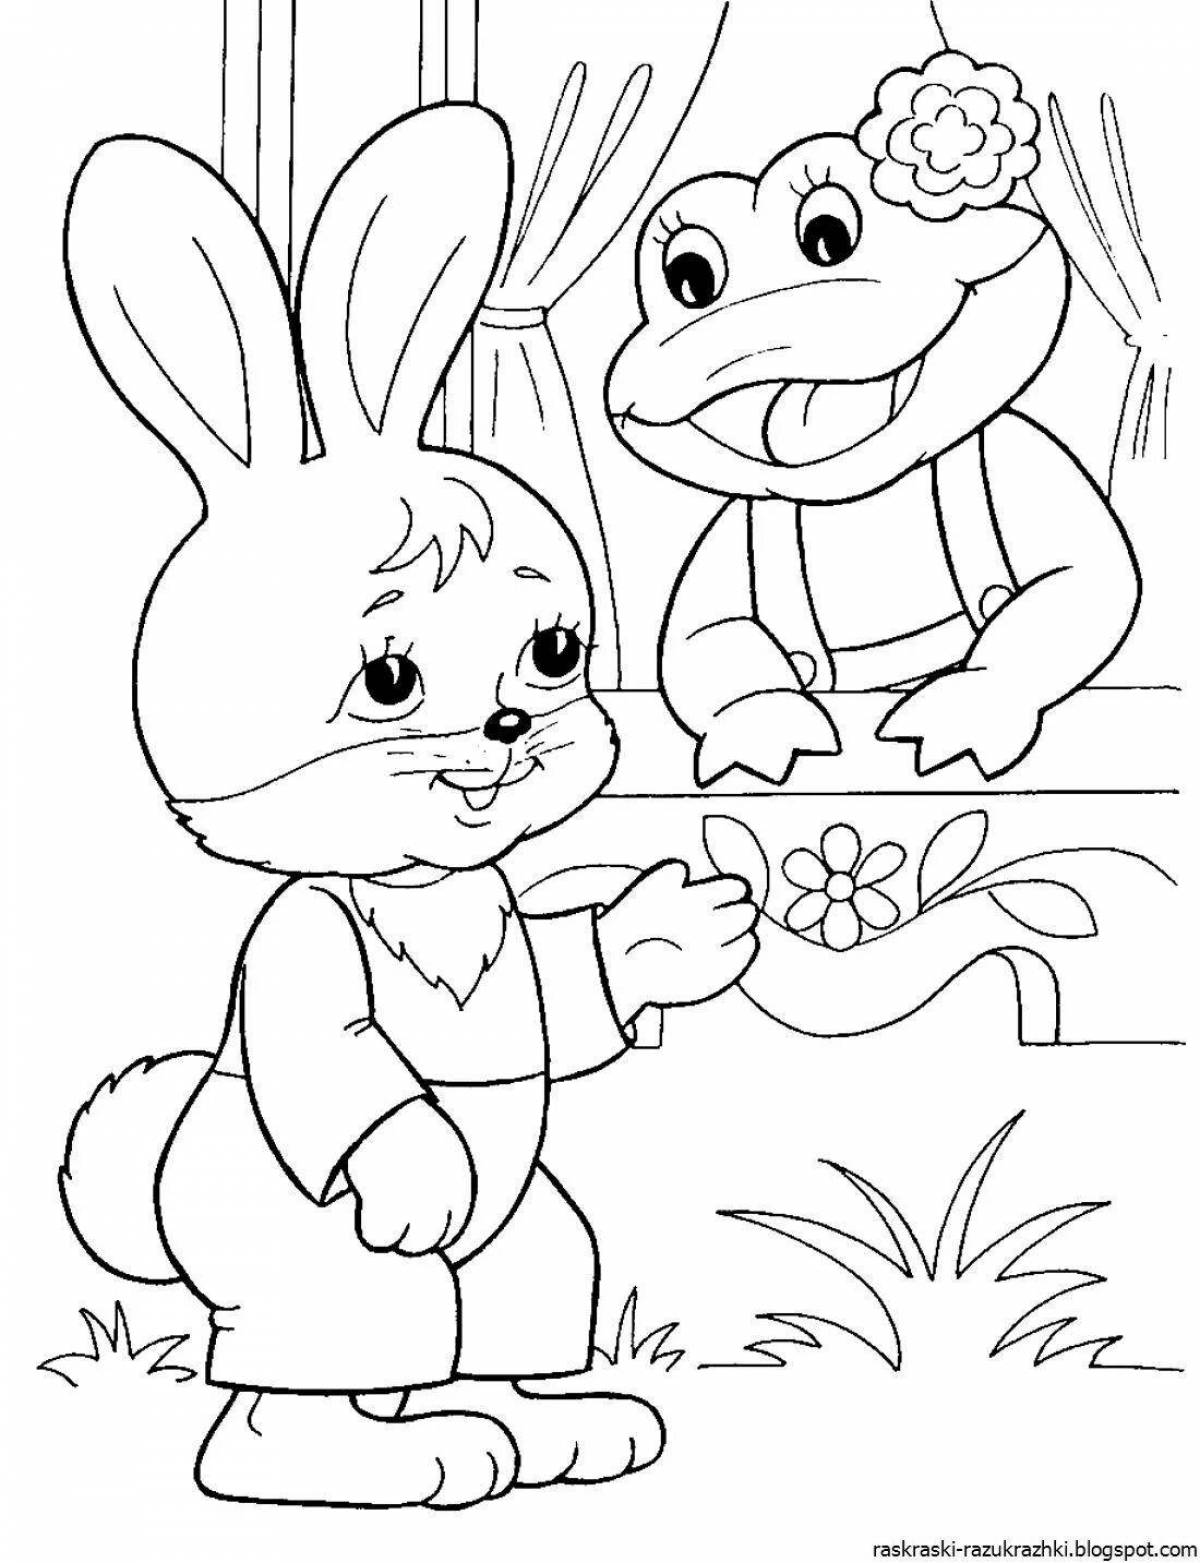 Color-fluffy teremok coloring book for children